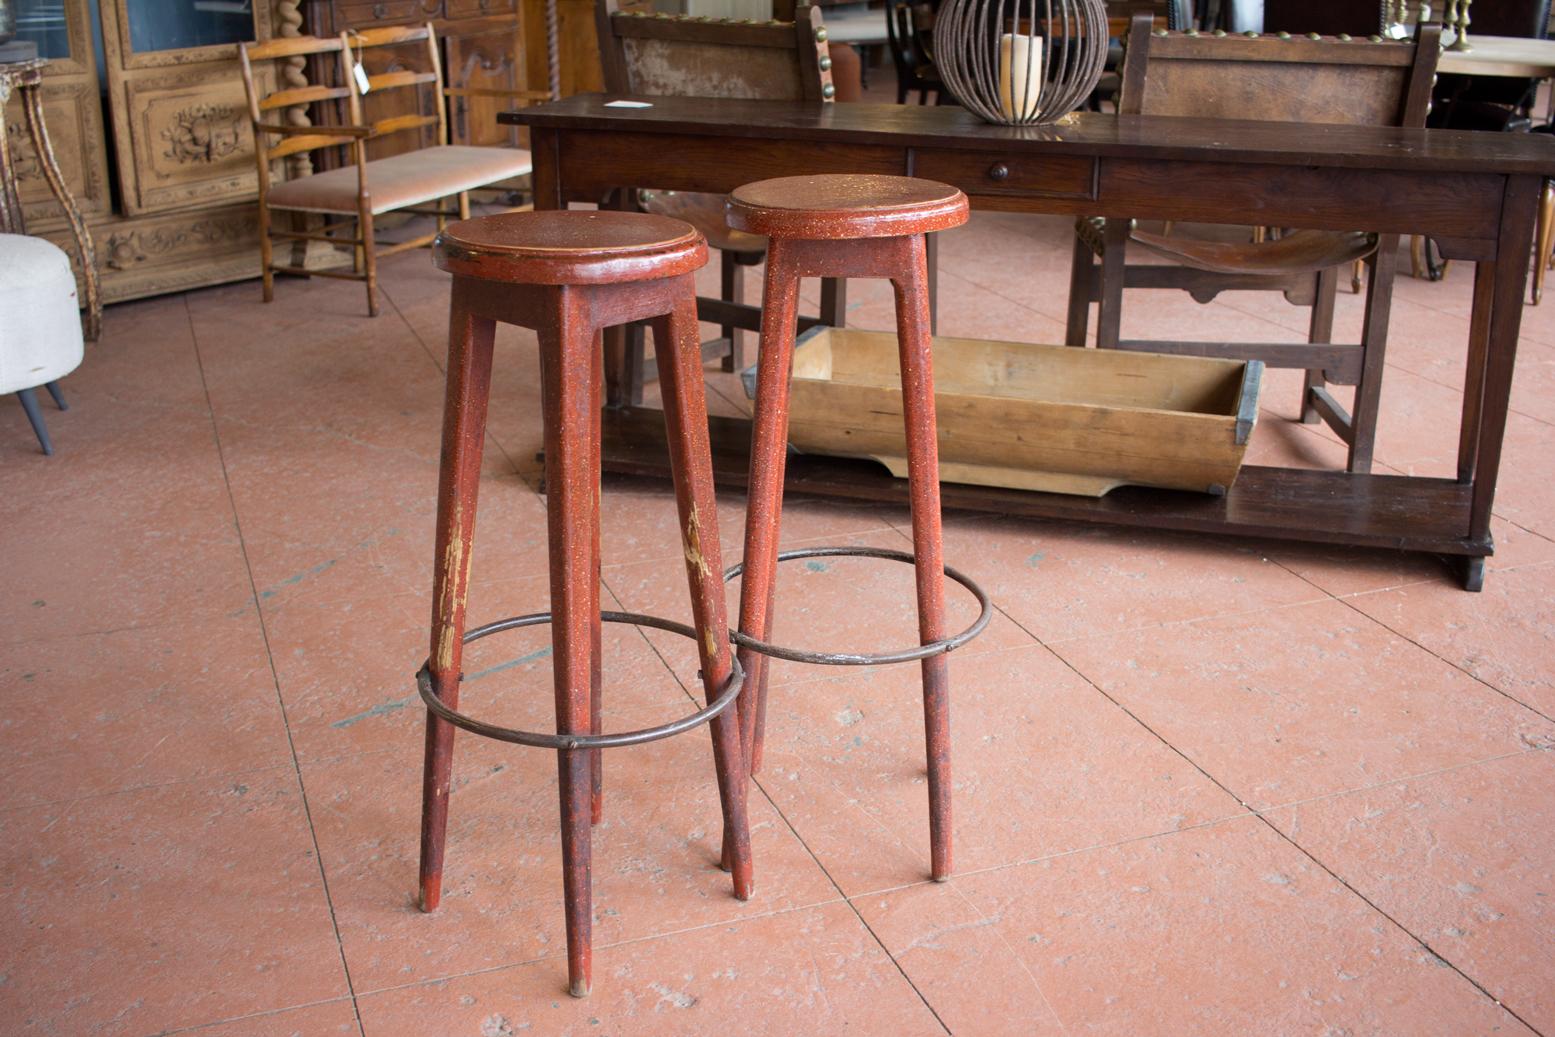 Pair of vintage bar stools, with original porphyry faux finish.